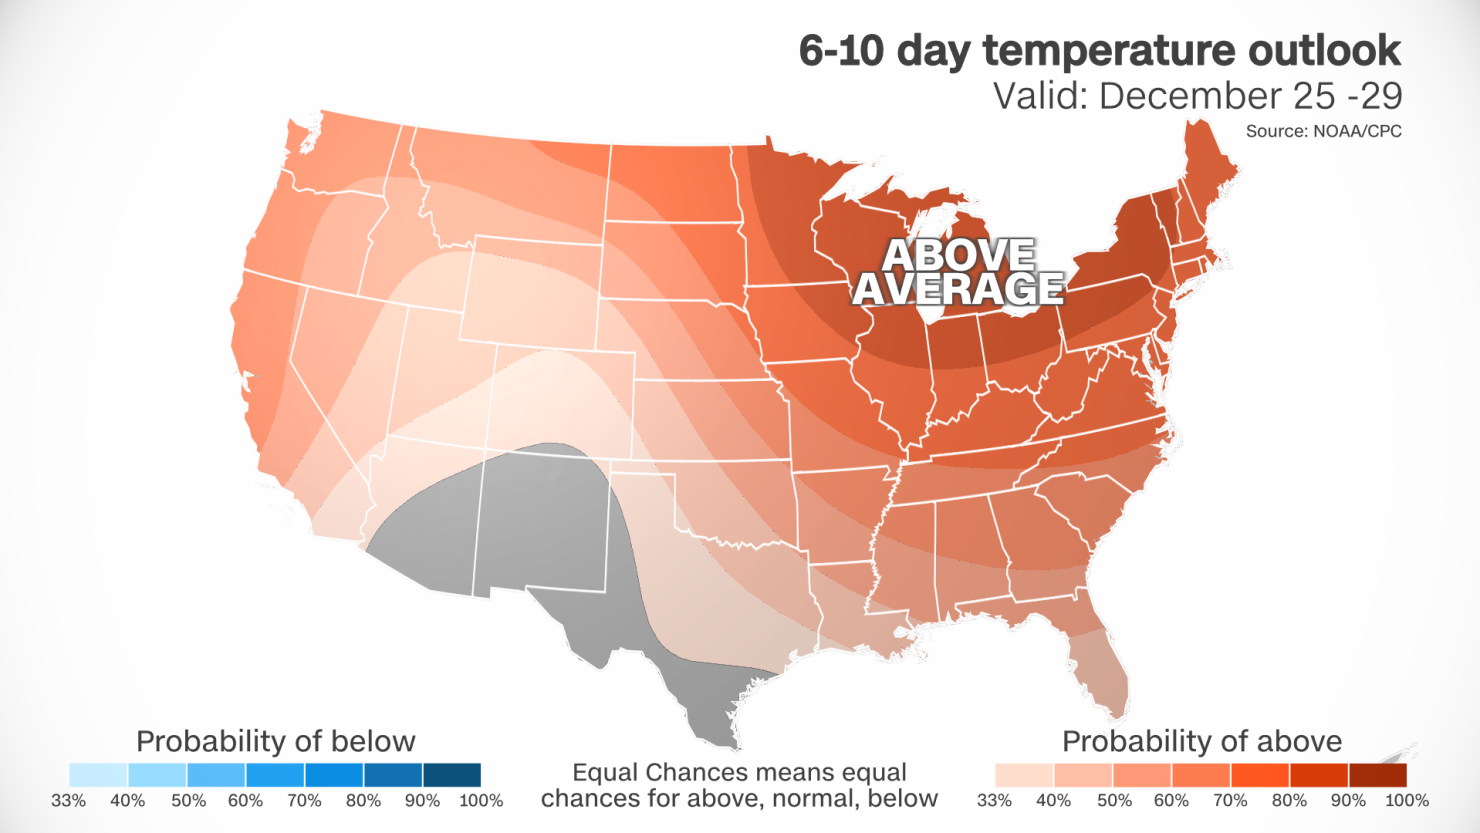 Above-average temperatures are expected across much of the US for Christmas and beyond.